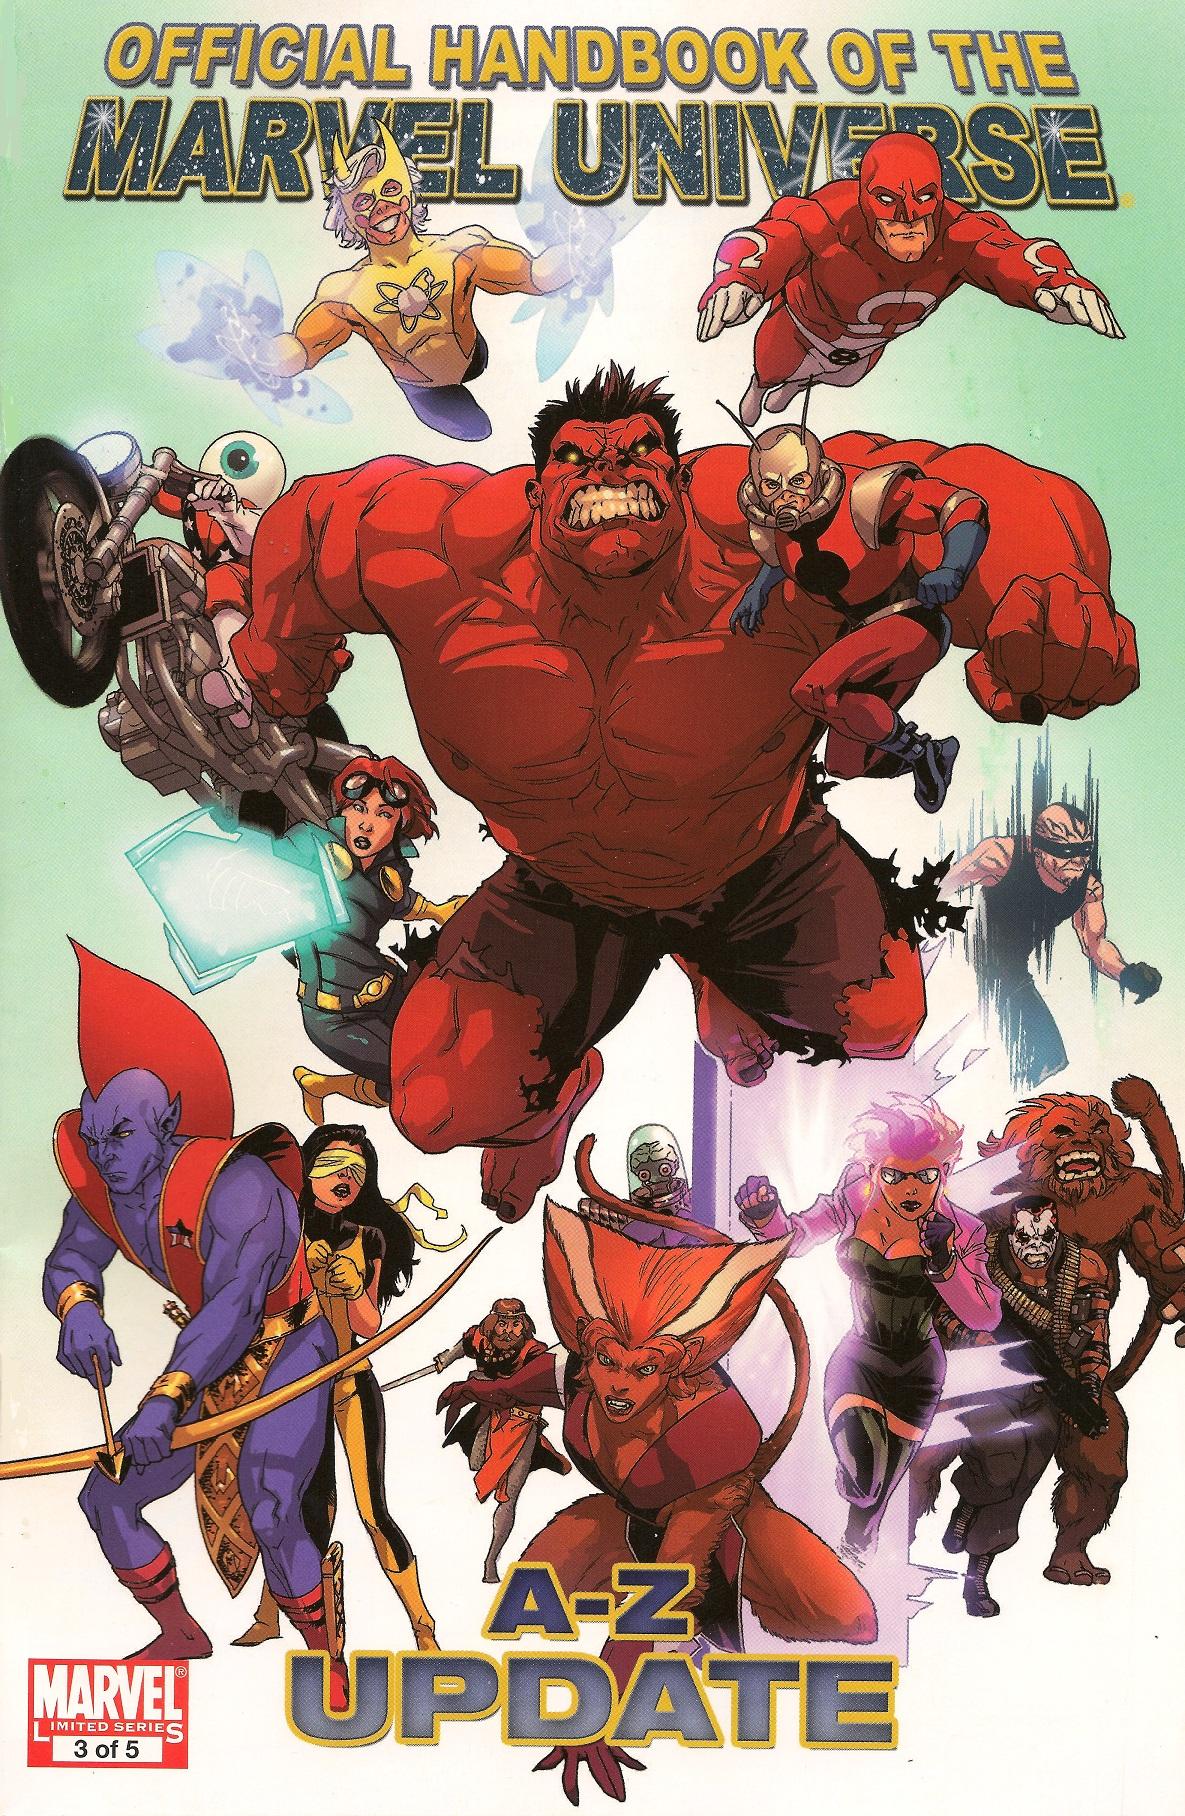 Official Handbook of the Marvel Universe A-Z Update Vol. 1 #3